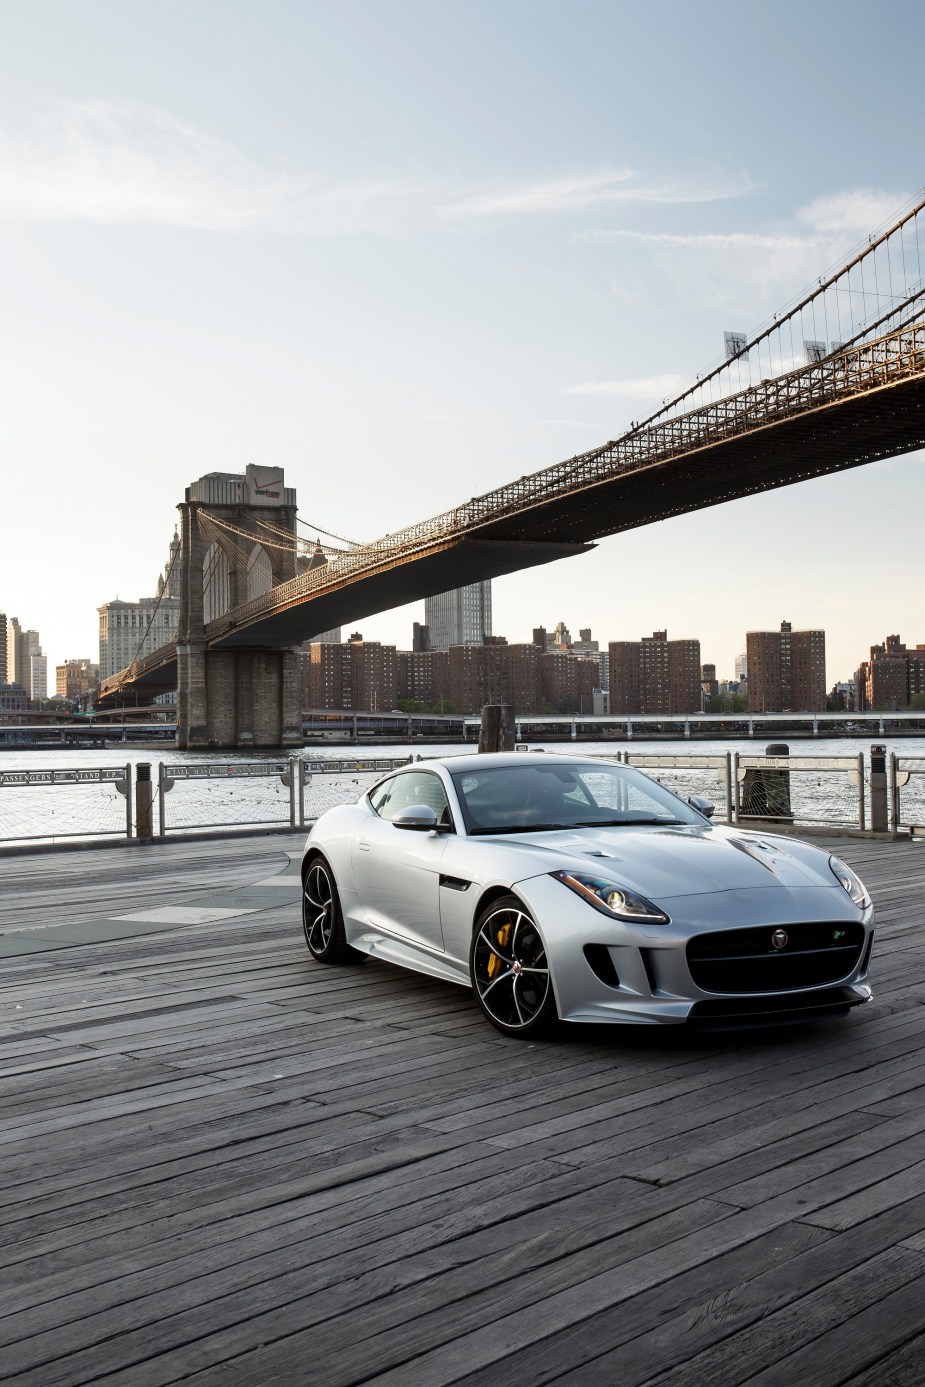 A Jaguar F-Type R is a great used alternative to the Chevy Corvette.